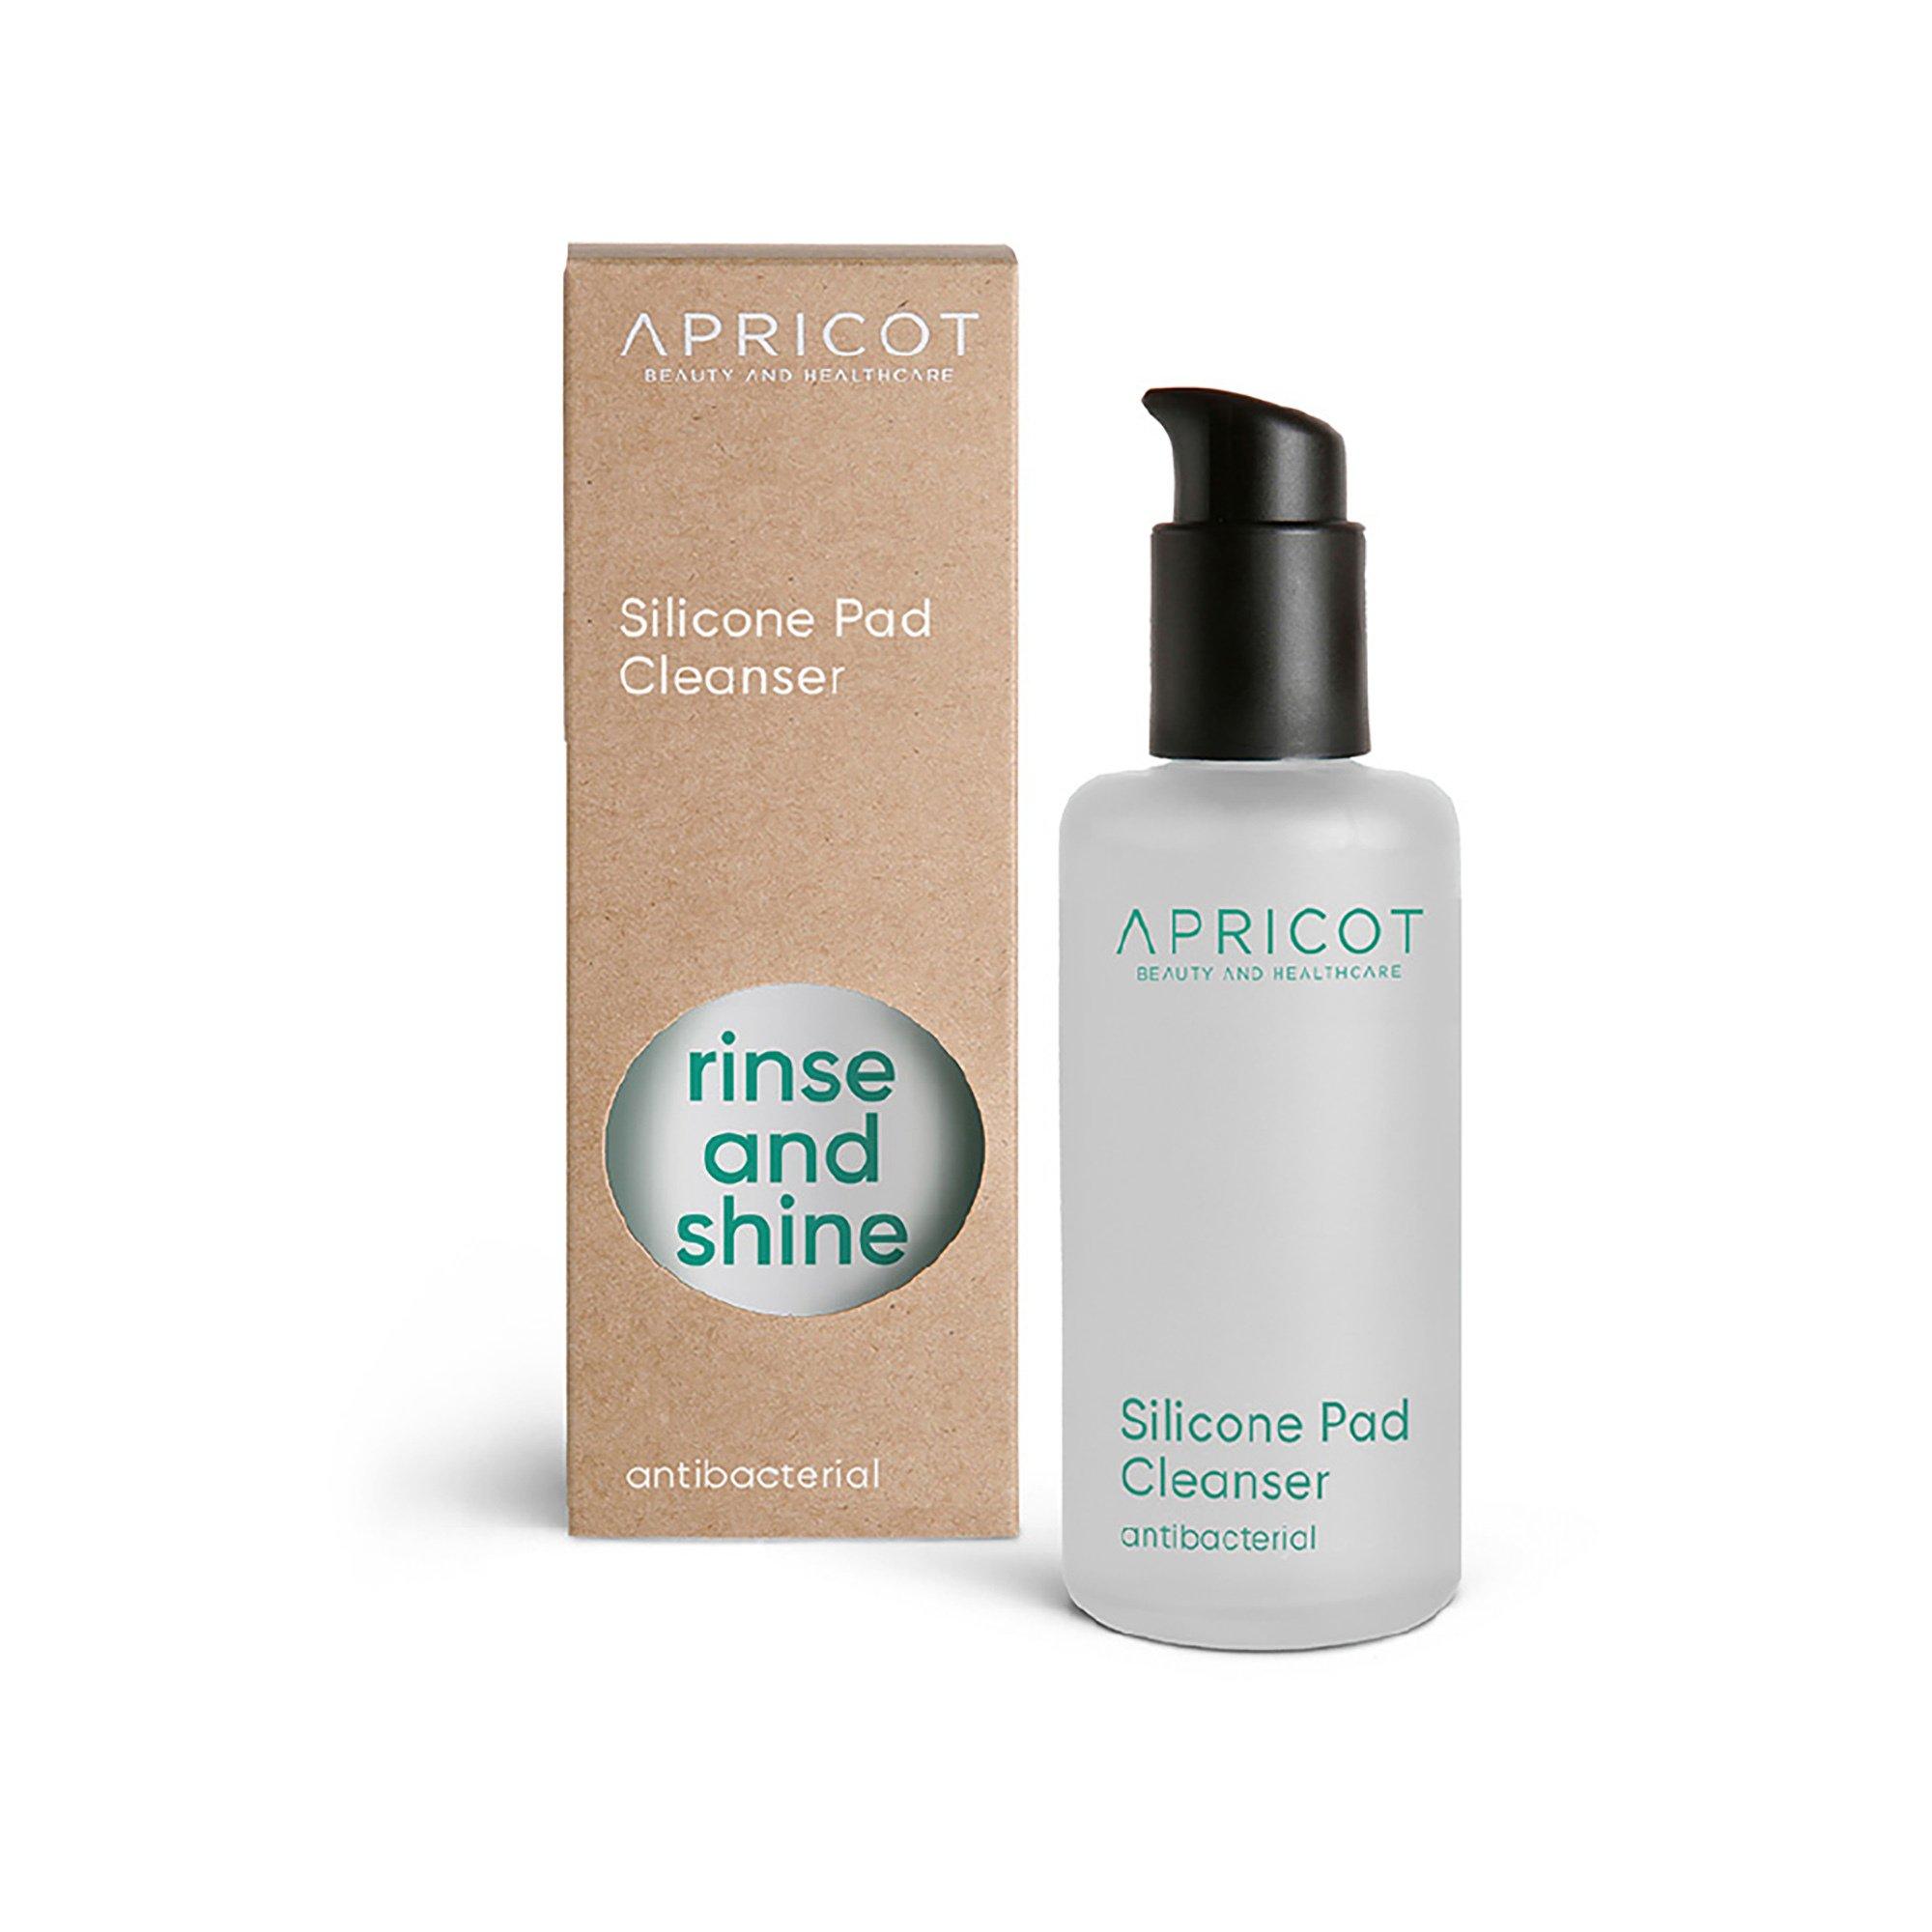 Image of APRICOT Silicone Pad Cleanser "Rinse And Shine" - 150 ml